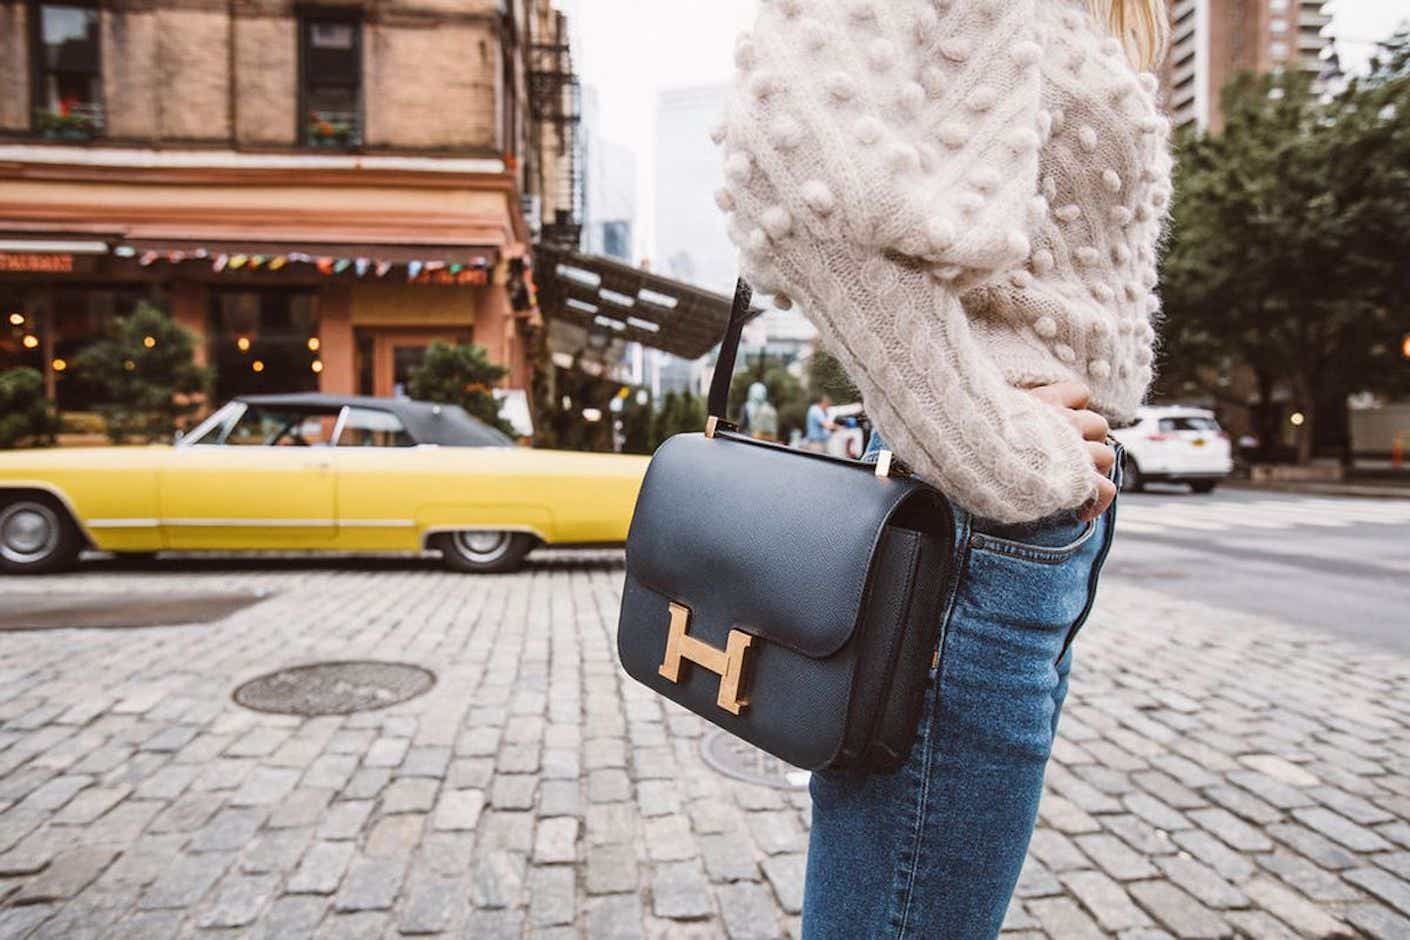 A woman wears a black handbag with gold details in front of a cobblestone lined street.